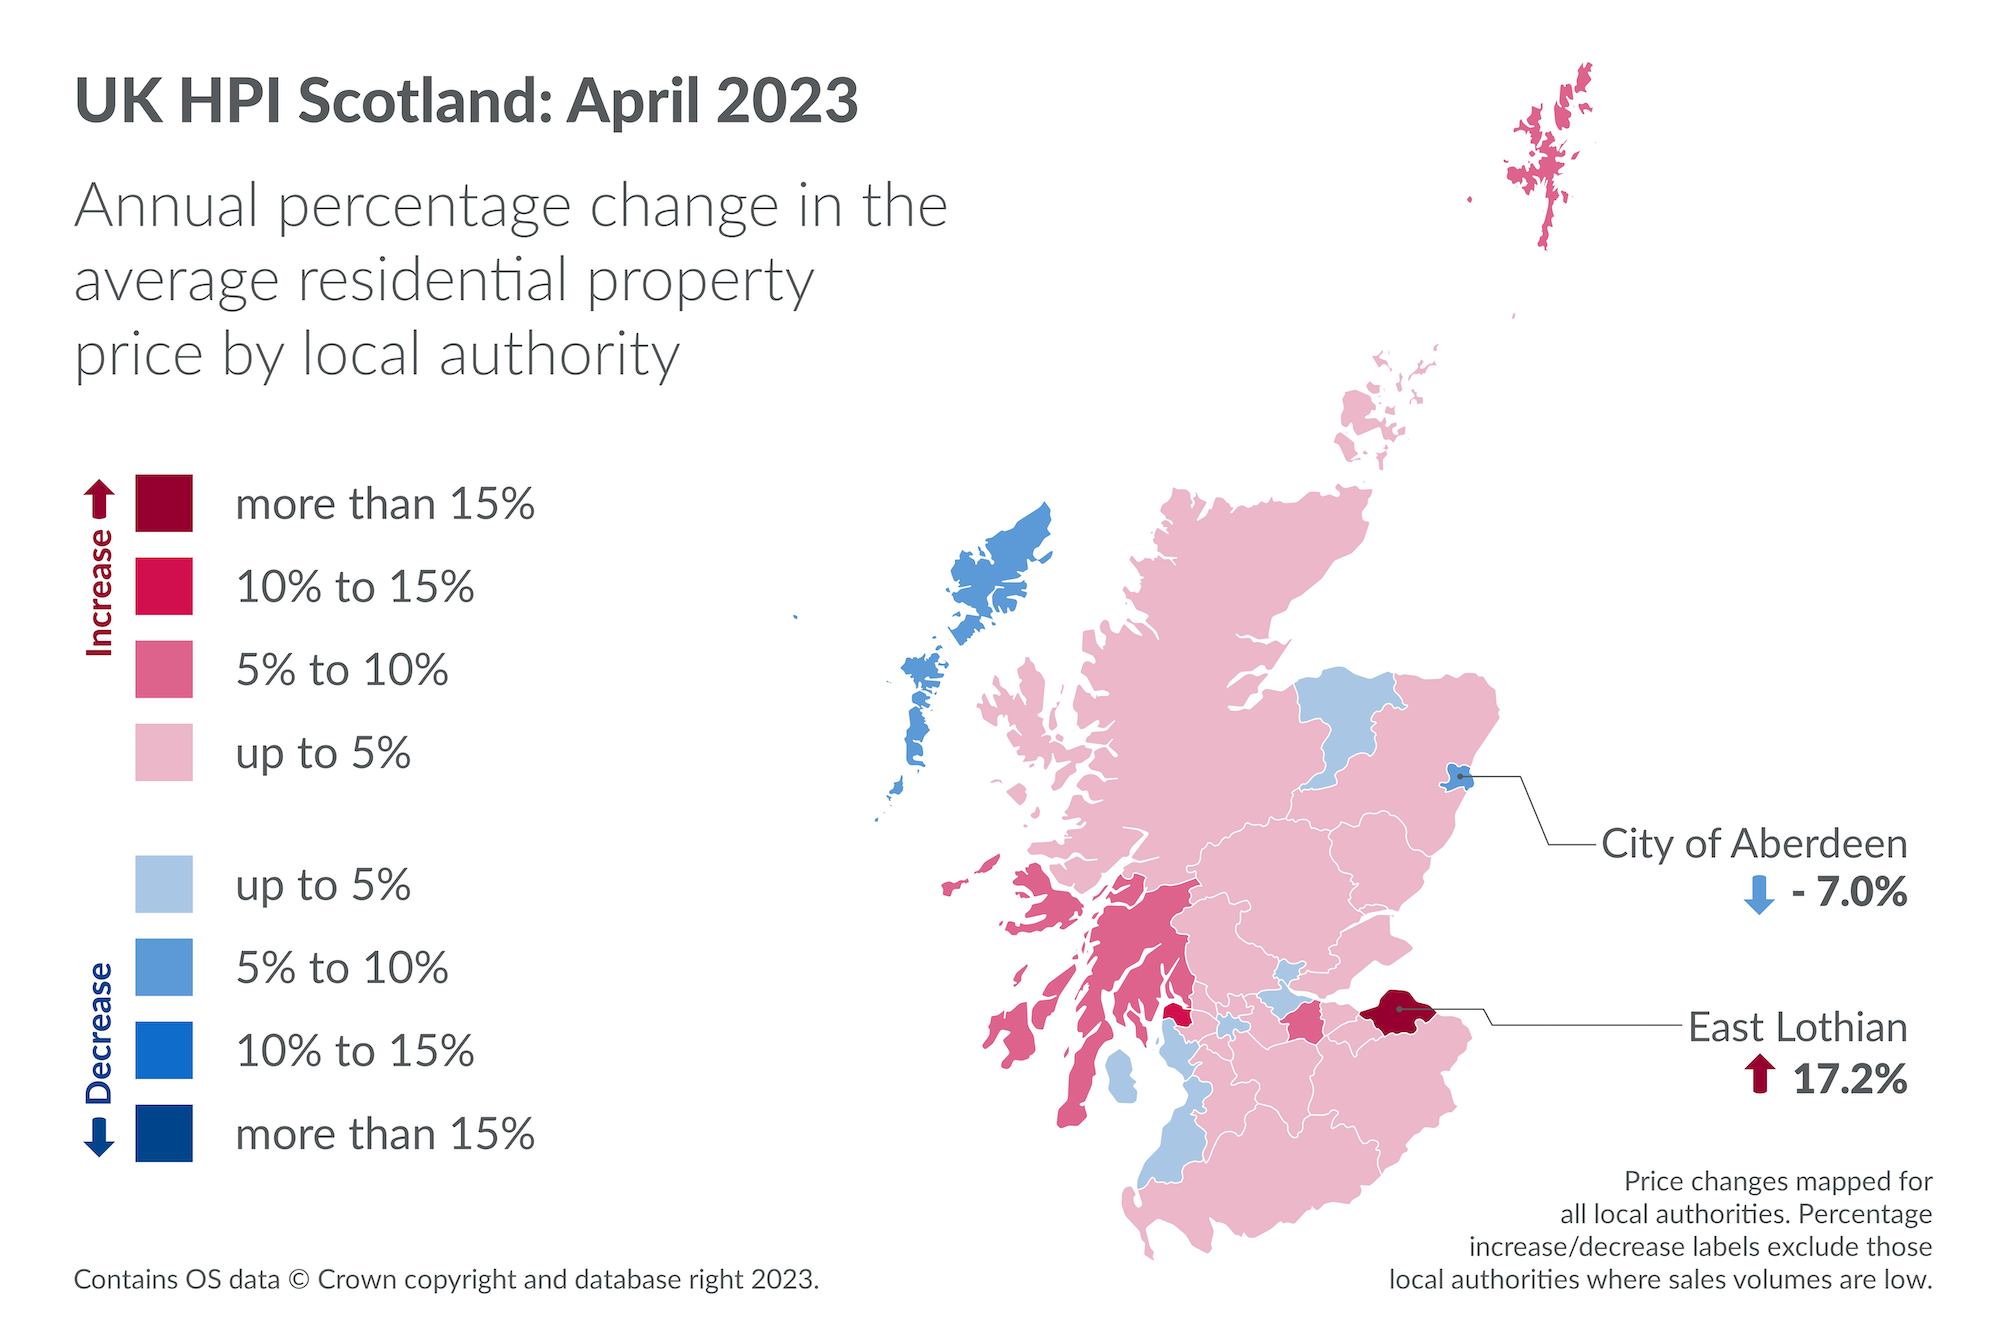 Scotland's house prices rise amid declining sales volume